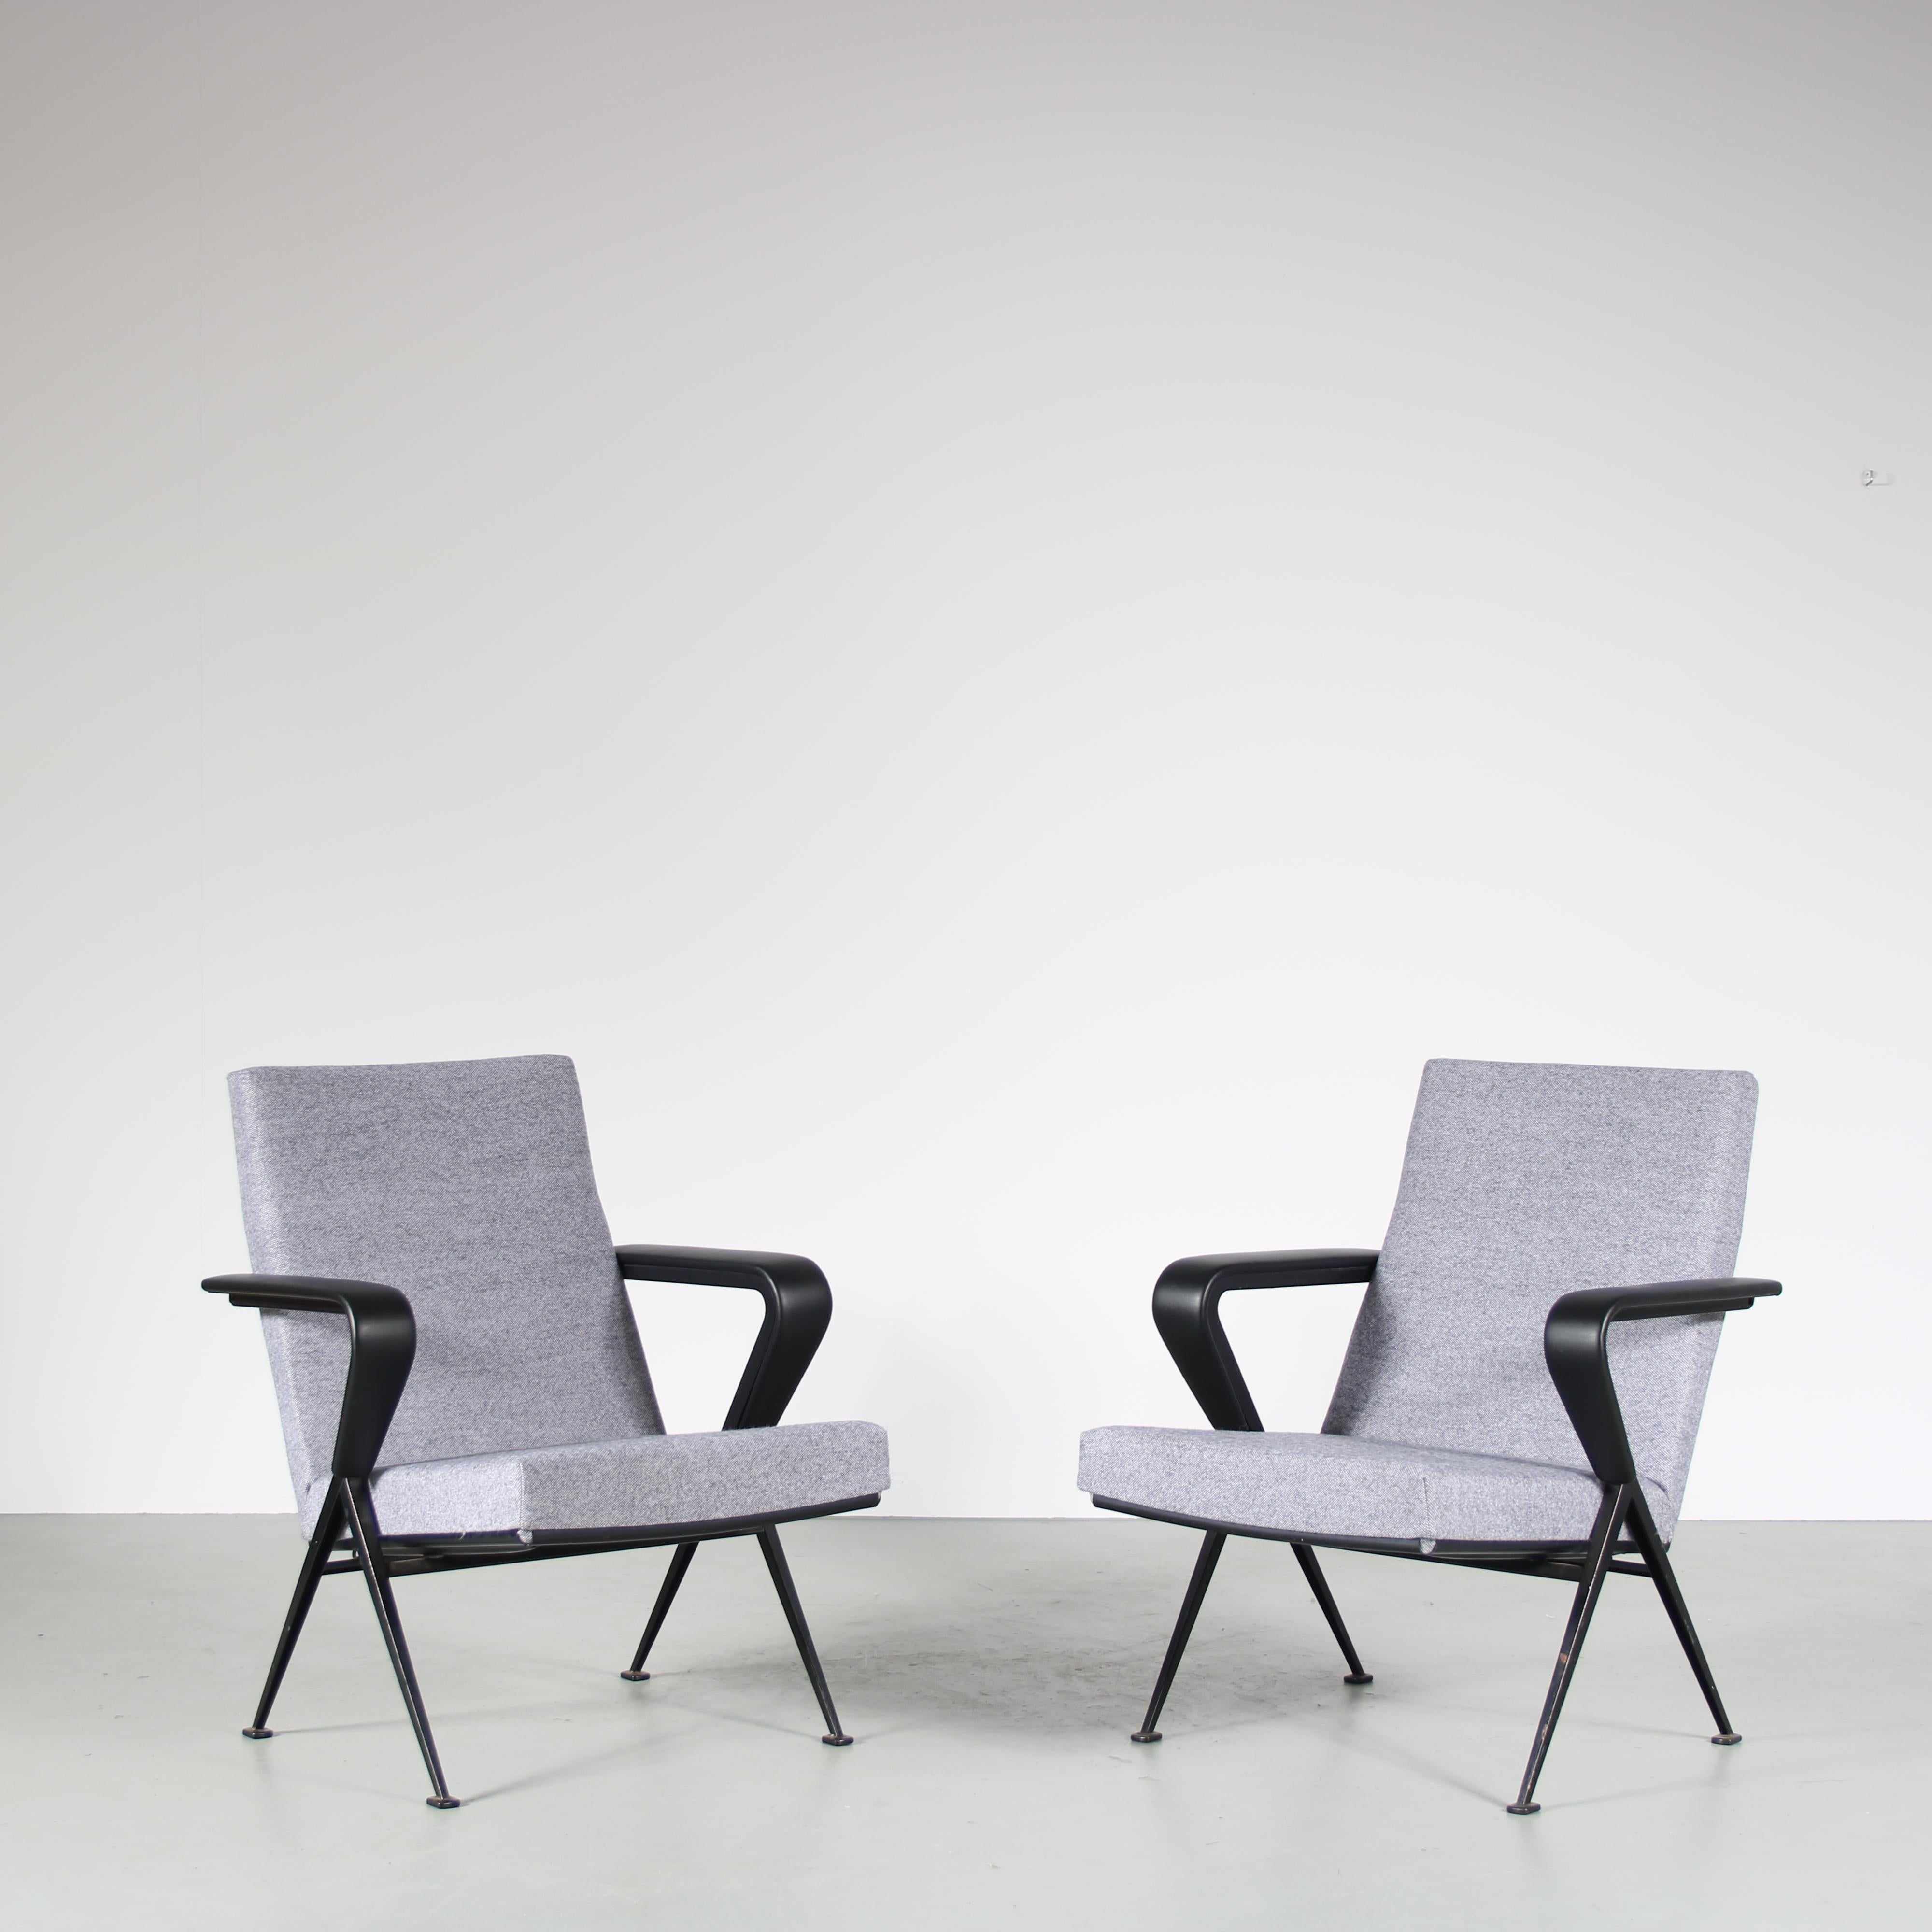 A fantastic pair of lounge chair, model “Repose”, designed by Friso Kramer and manufactured by Ahrend de Cirkel in the Netherlands on 28 May 1969.

These eye-catching chairs are an iconic find of midcentury Dutch design. Their straight forward,